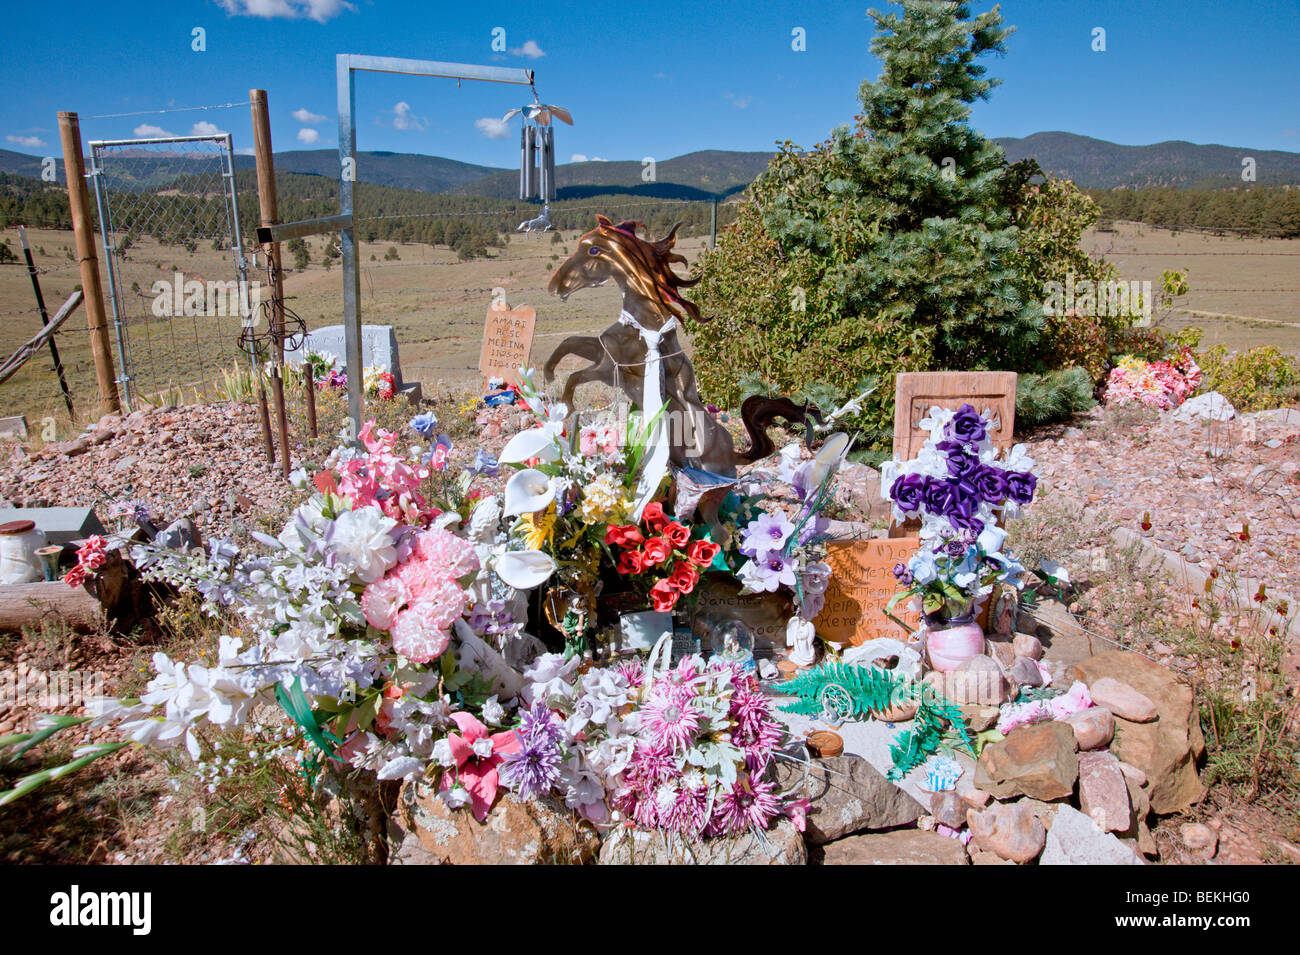 A colorful spray of flowers and a collection of unusual remembrances mark this resting place in the Elizabethtown cemetery - NM. Stock Photo